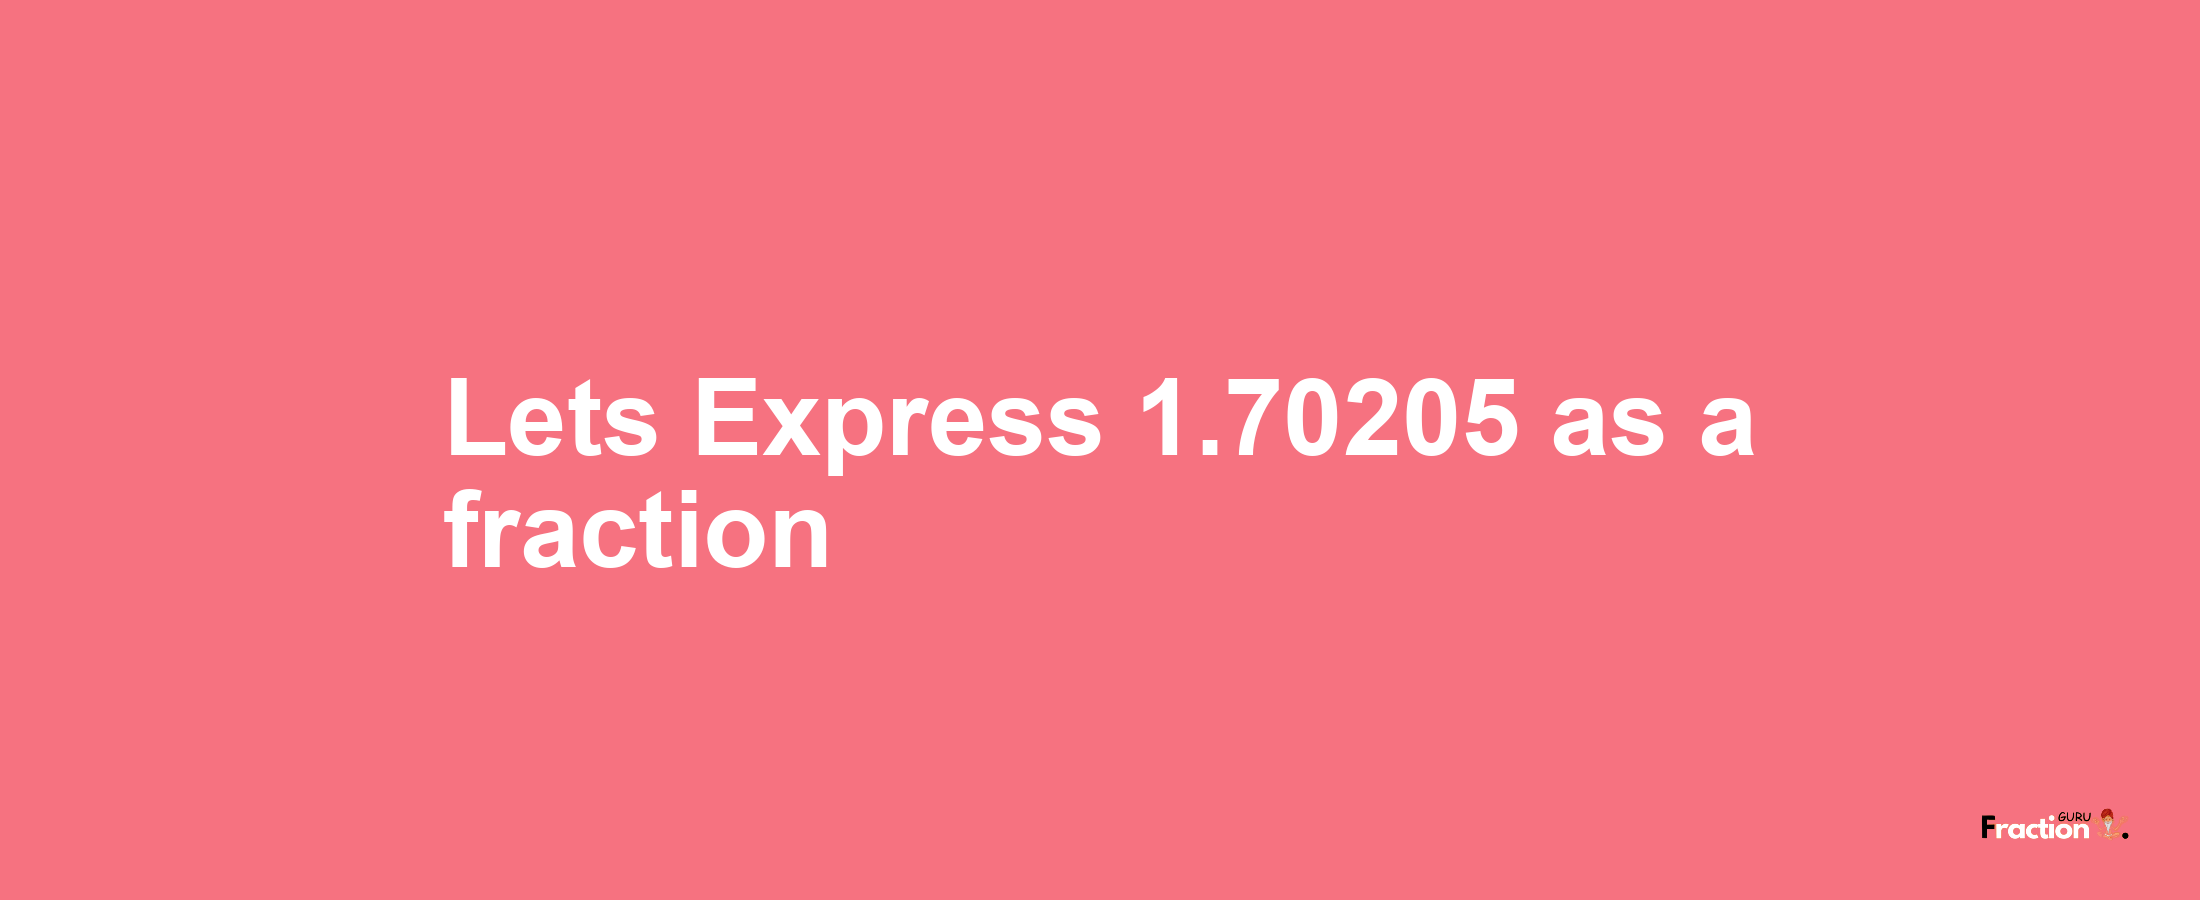 Lets Express 1.70205 as afraction